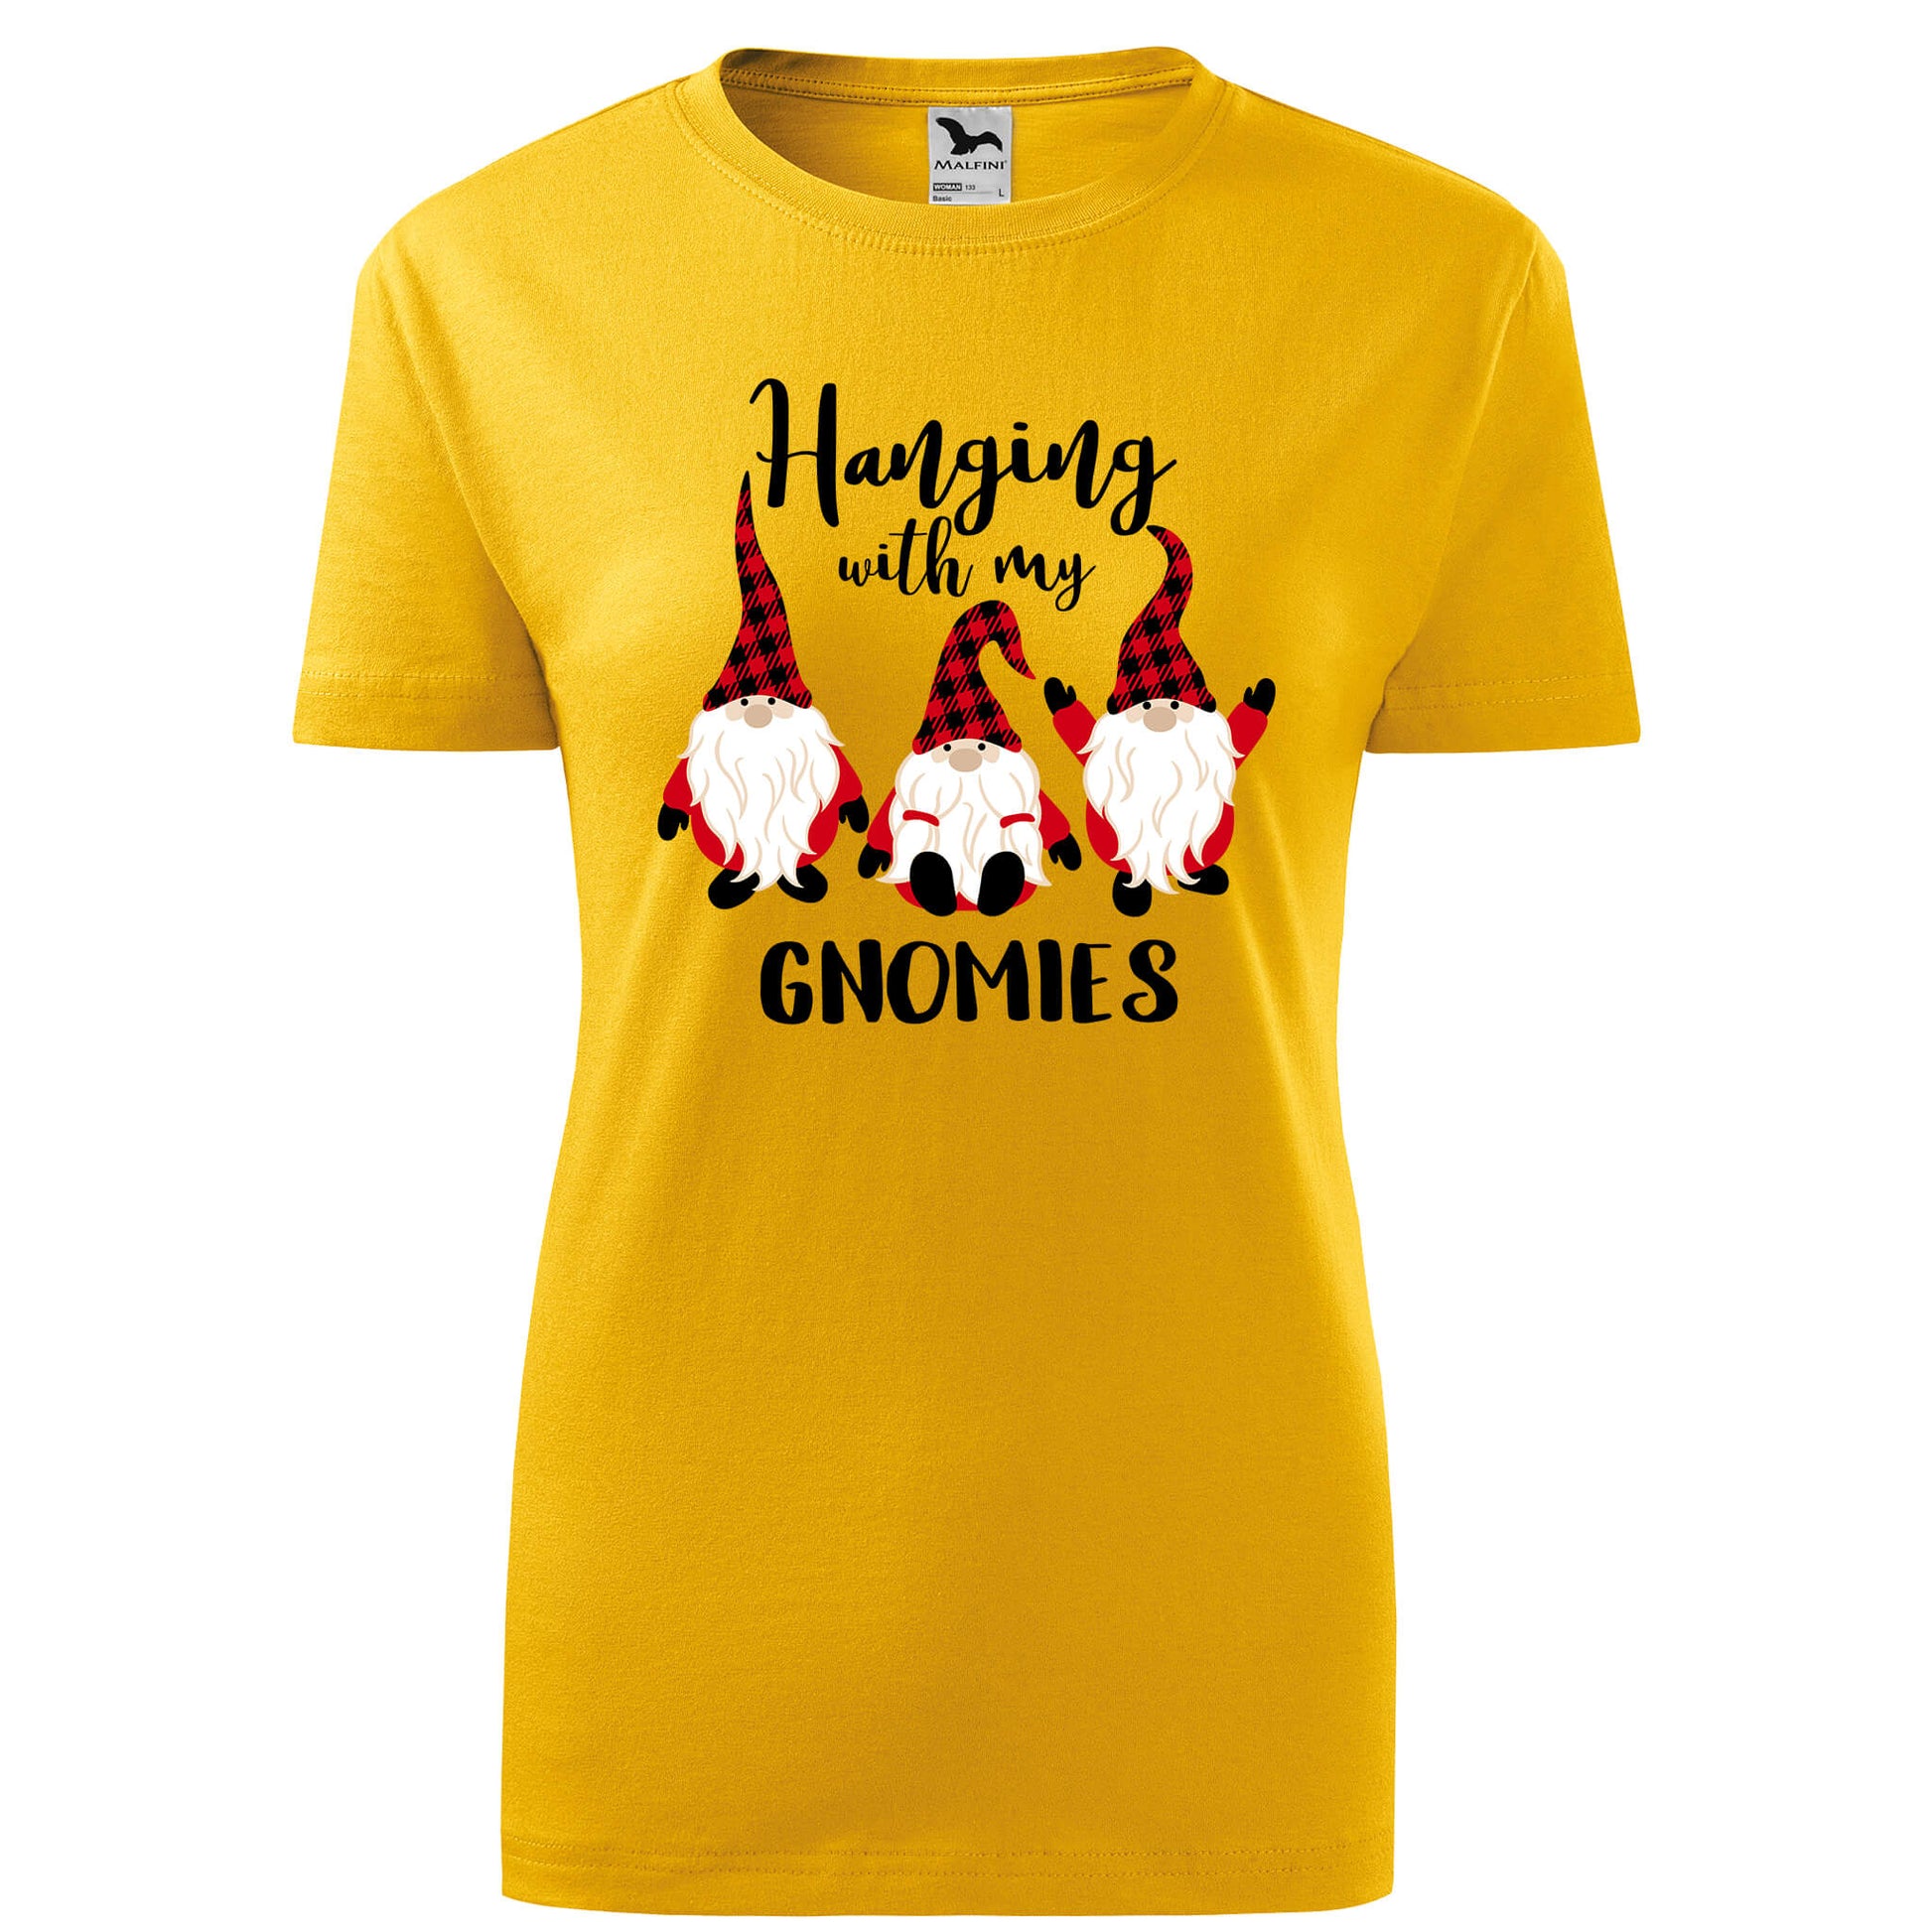 Hanging with my gnomies t-shirt - rvdesignprint